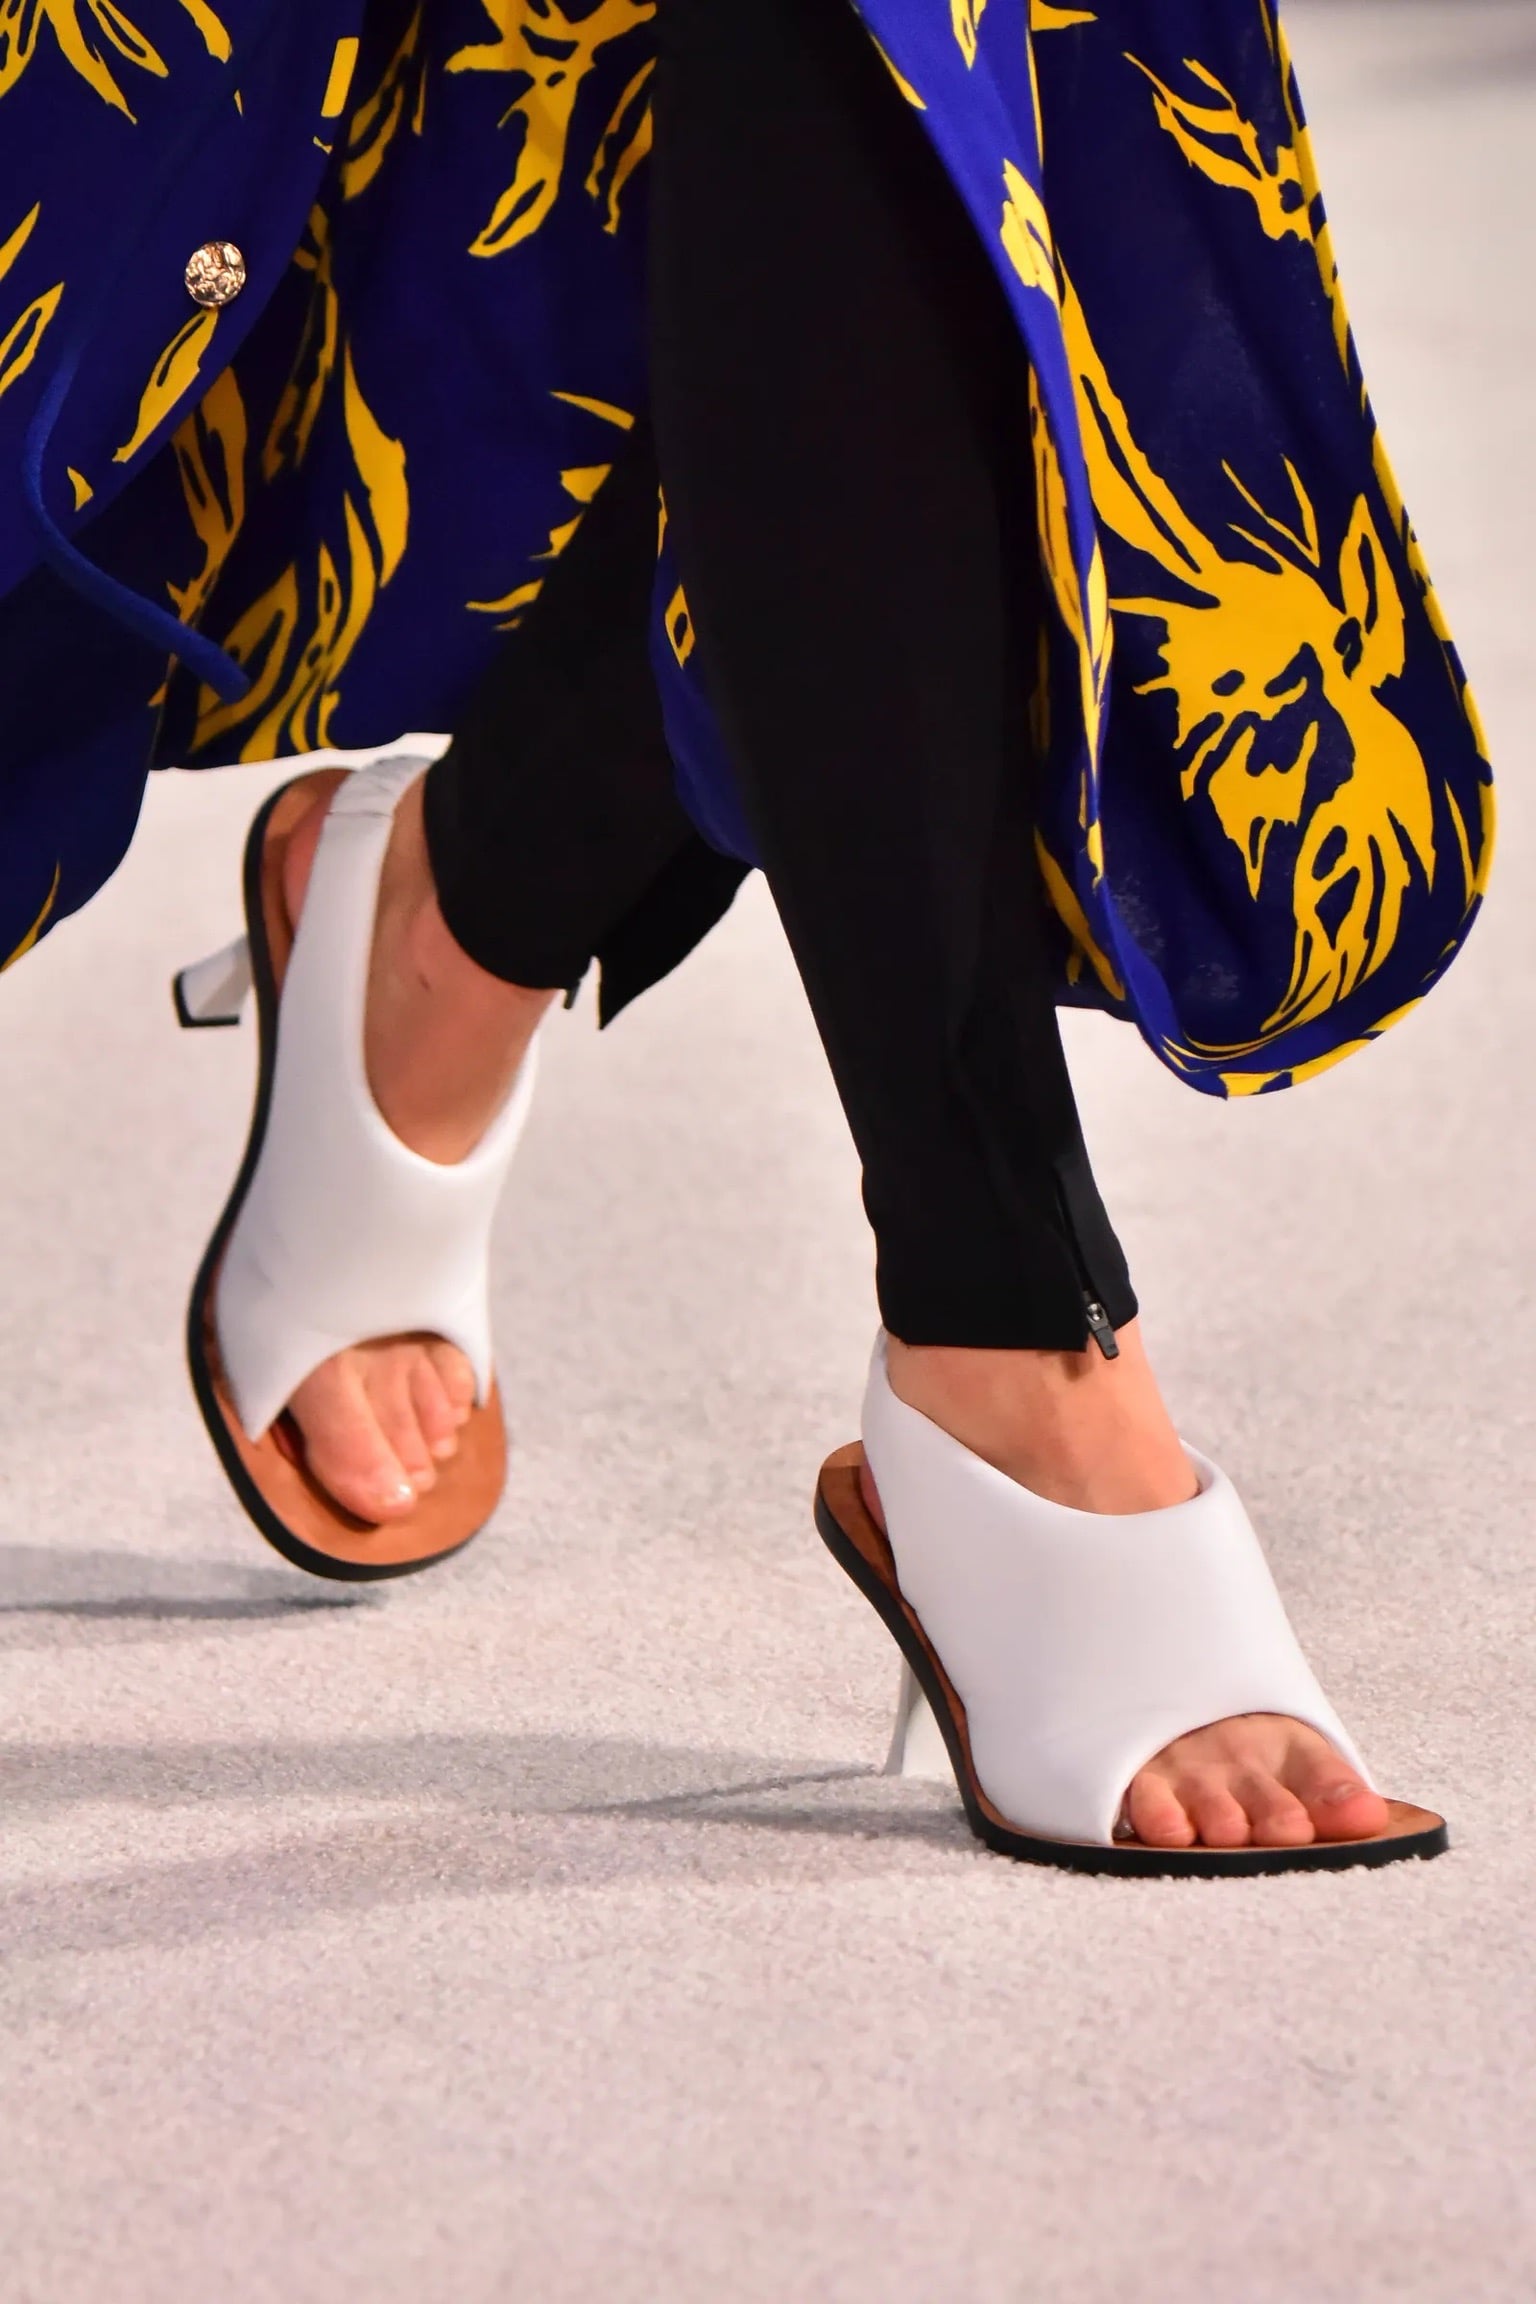 Shoes from Proenza Schouler spring 2022 collection. | 6 Shoe Trends We'll  Be Adding to Our Spring '22 Wish Lists | POPSUGAR Fashion Photo 34